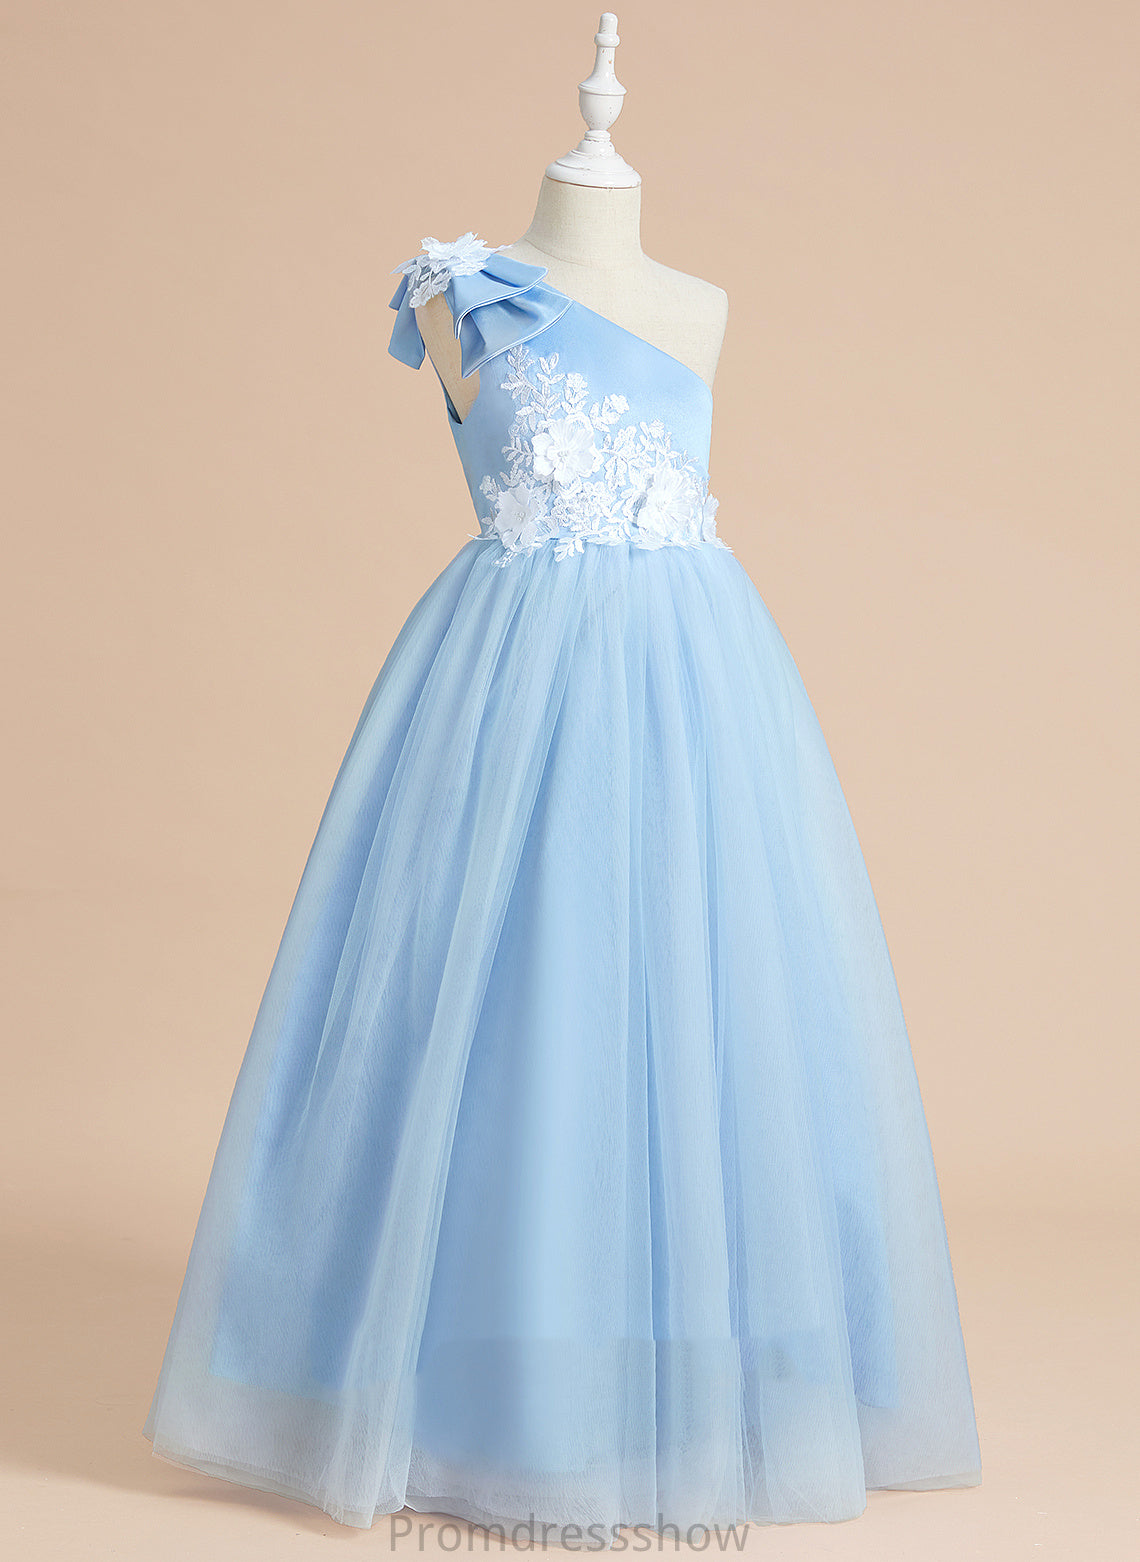 - Girl Sleeveless Satin/Tulle With Flower Girl Dresses Flower Lace/Bow(s) Floor-length Ball-Gown/Princess Dress Tricia One-Shoulder